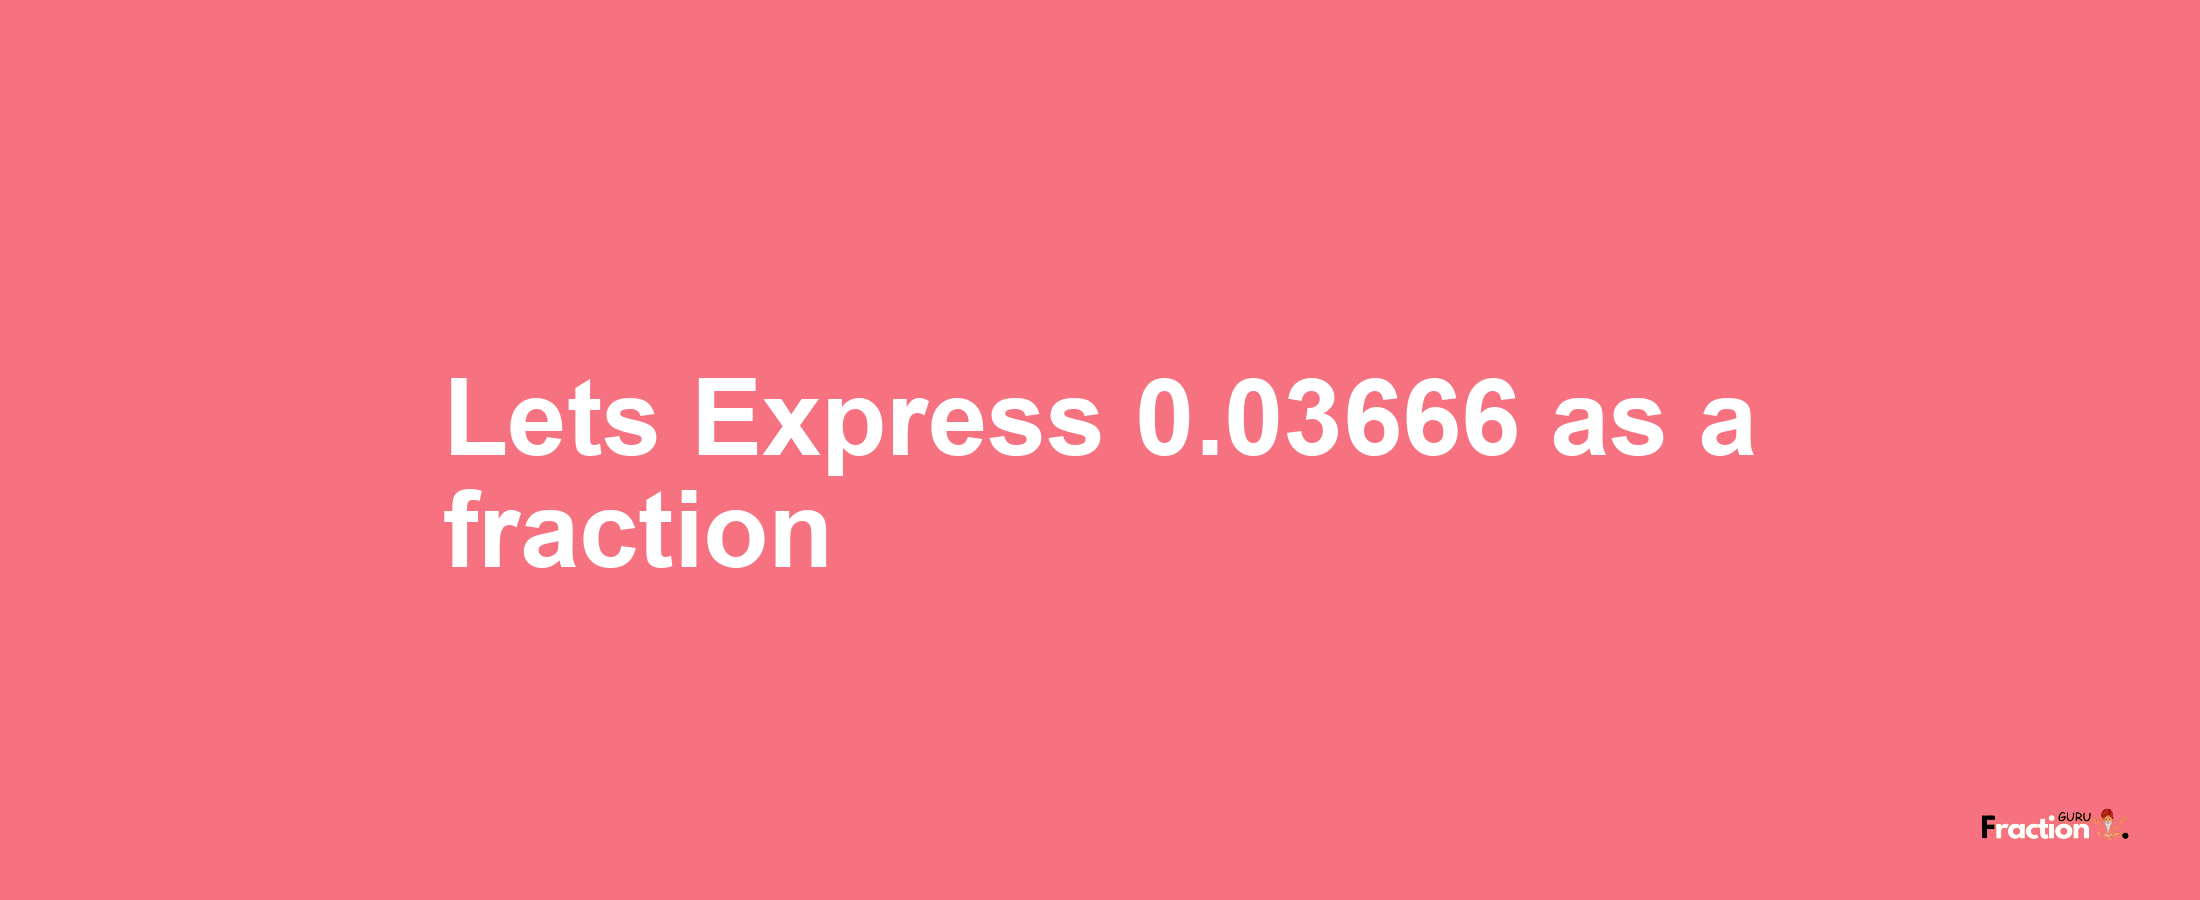 Lets Express 0.03666 as afraction